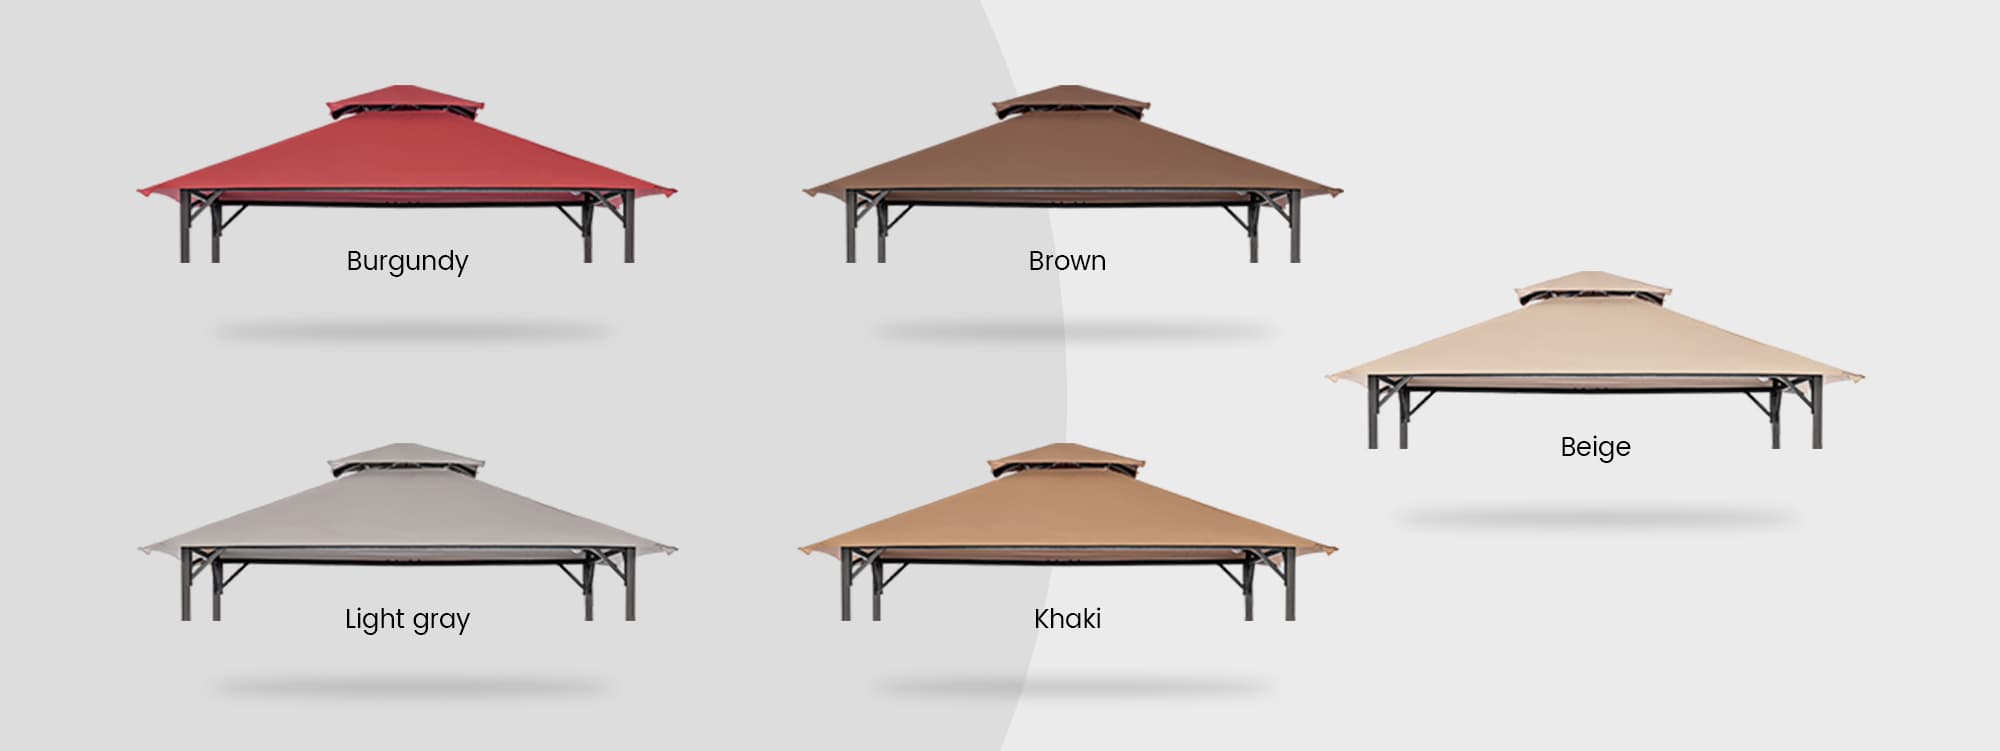 canopy with 5 color options: burgundy, brown, light gray, khaki, beige